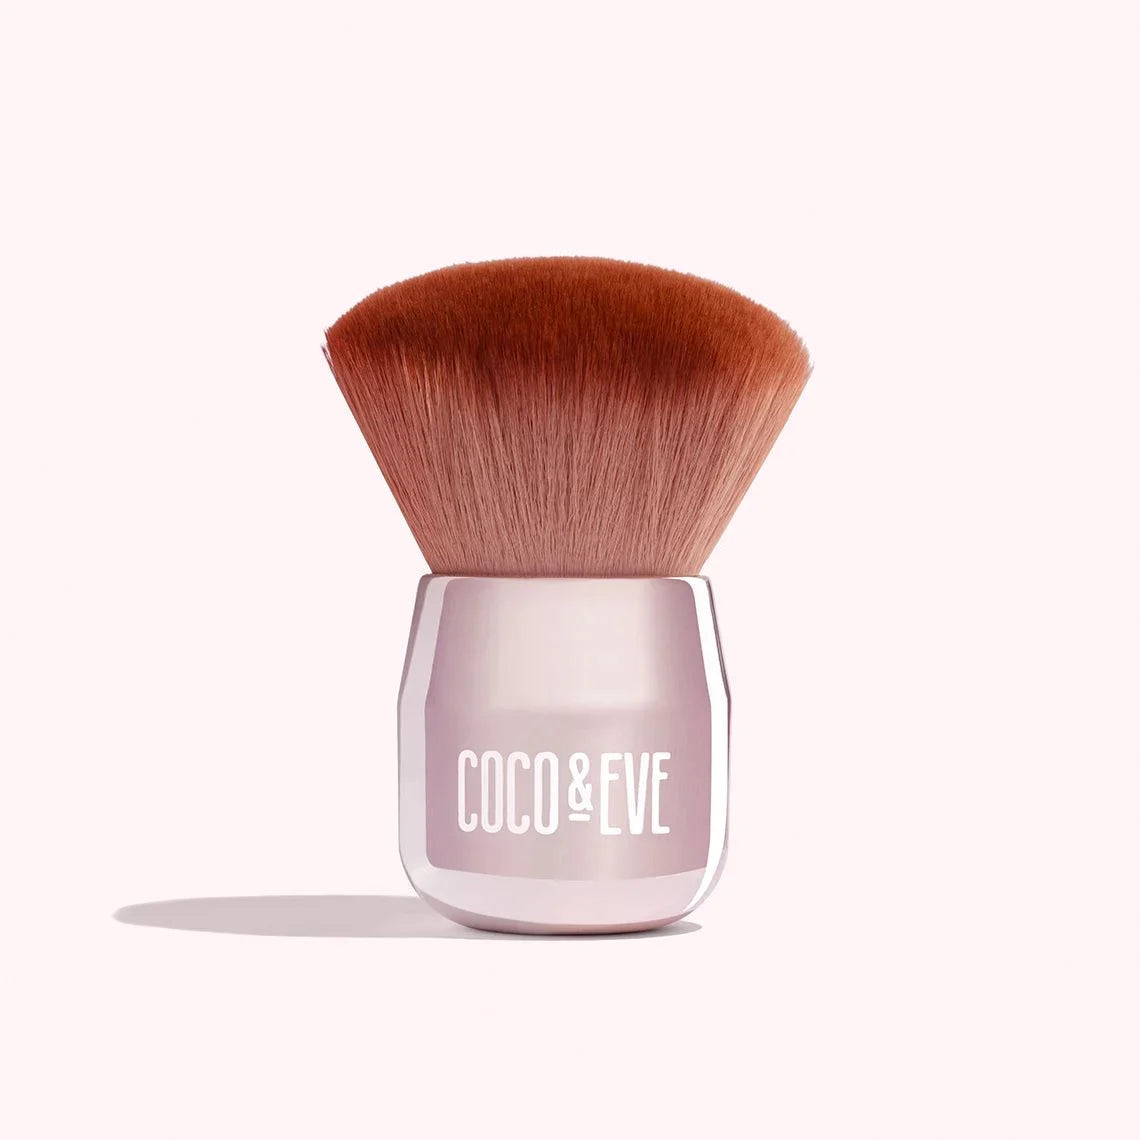 Coco & Eve Limited Edition Face Kabuki Brush - Glow Addict Luxe